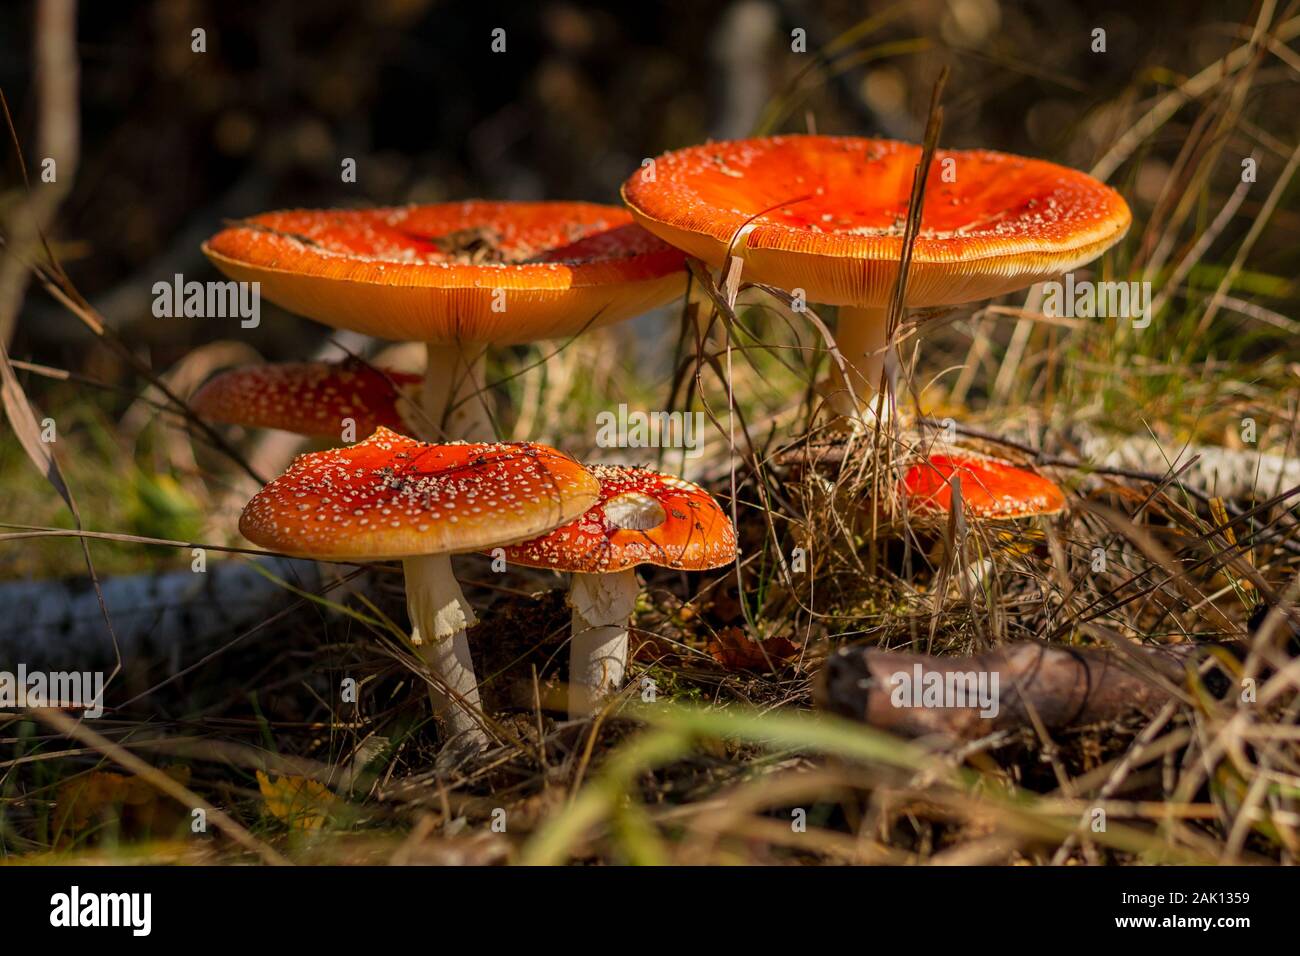 Amanita muscaria, the fly agaric - Close-up view of a group of mushrooms in the forest Stock Photo